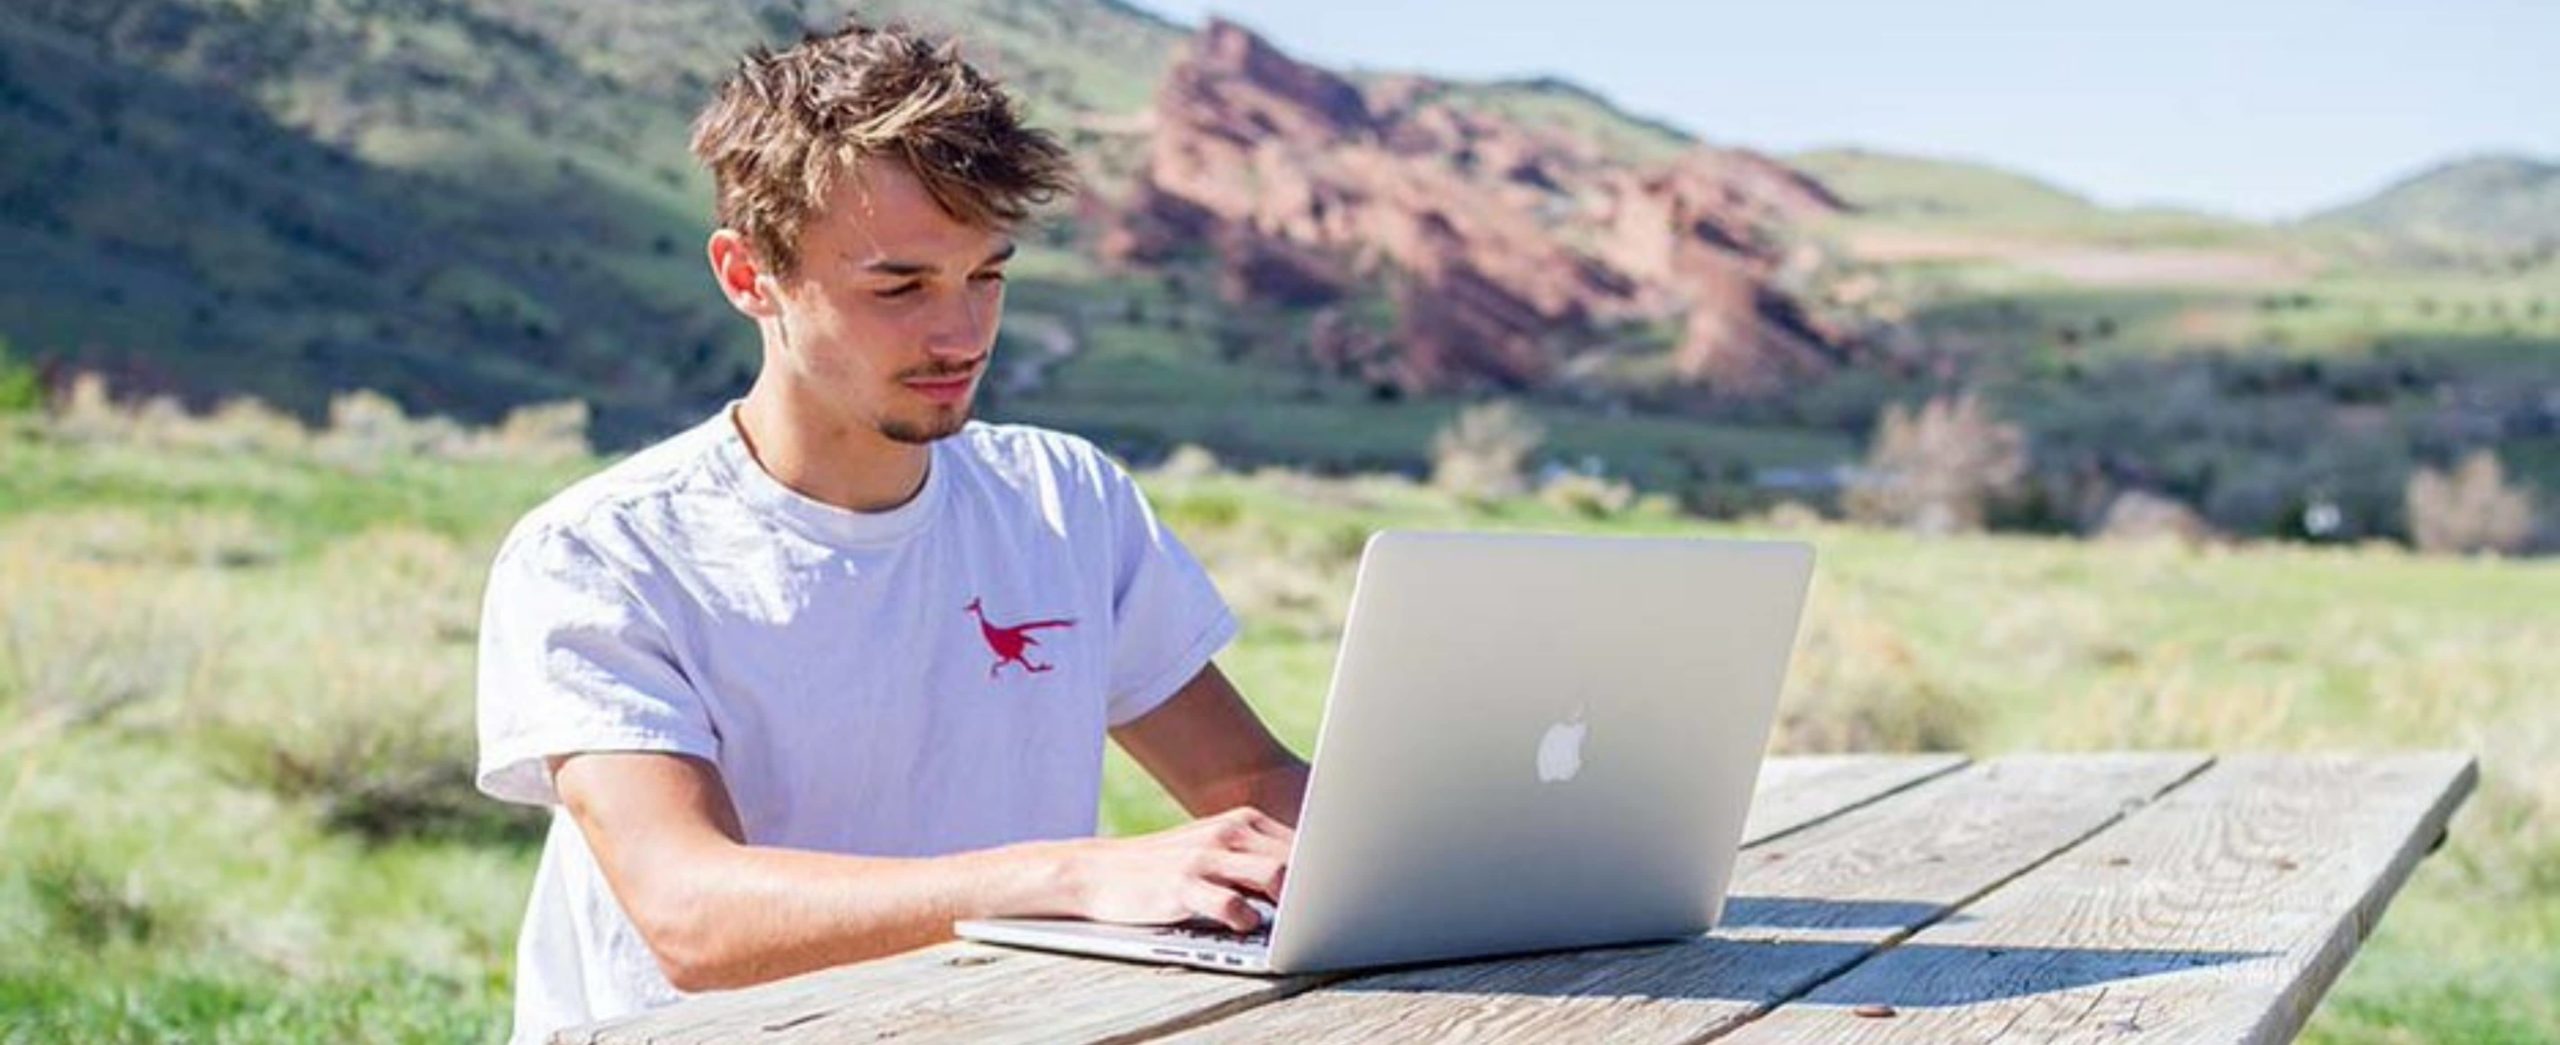 Online MSU Denver student learning outside the classroom